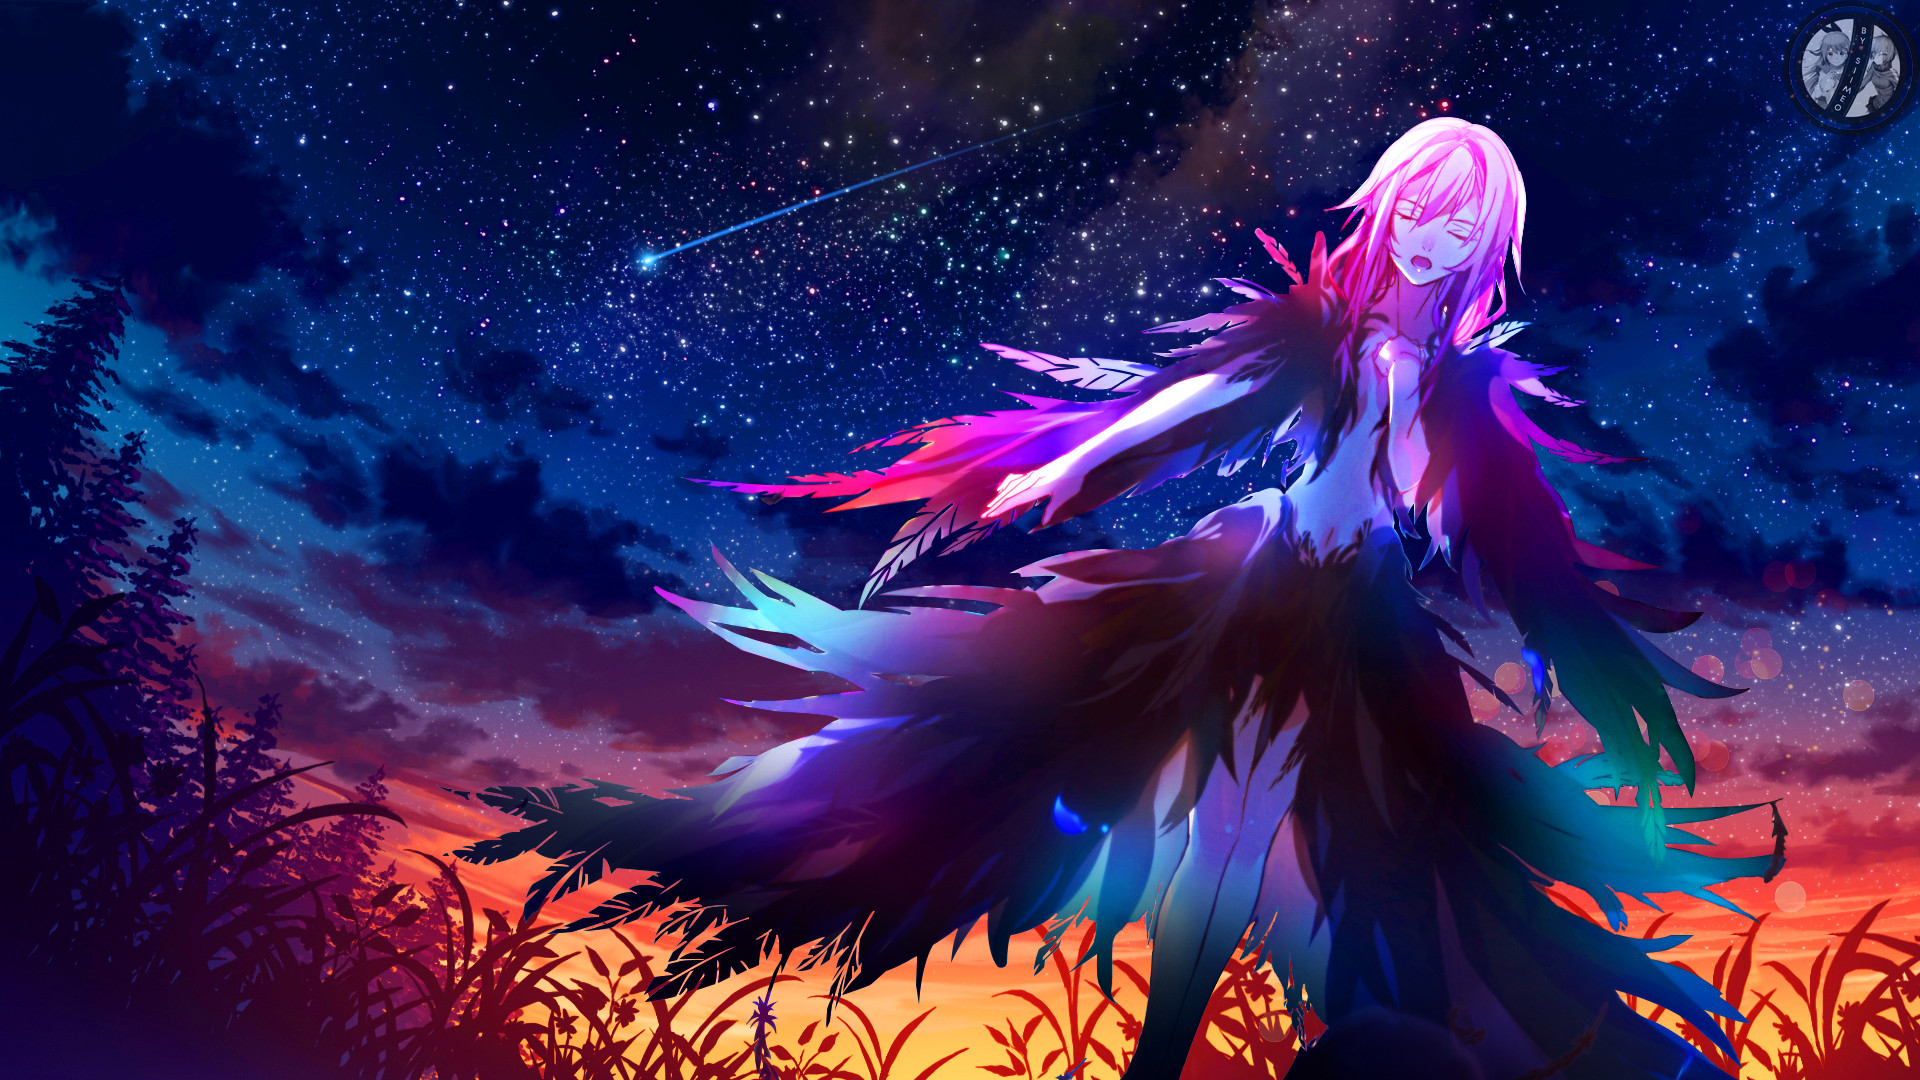 1920x1080 ... Departure blessing - Guilty Crown Wallpaper by Siimeo